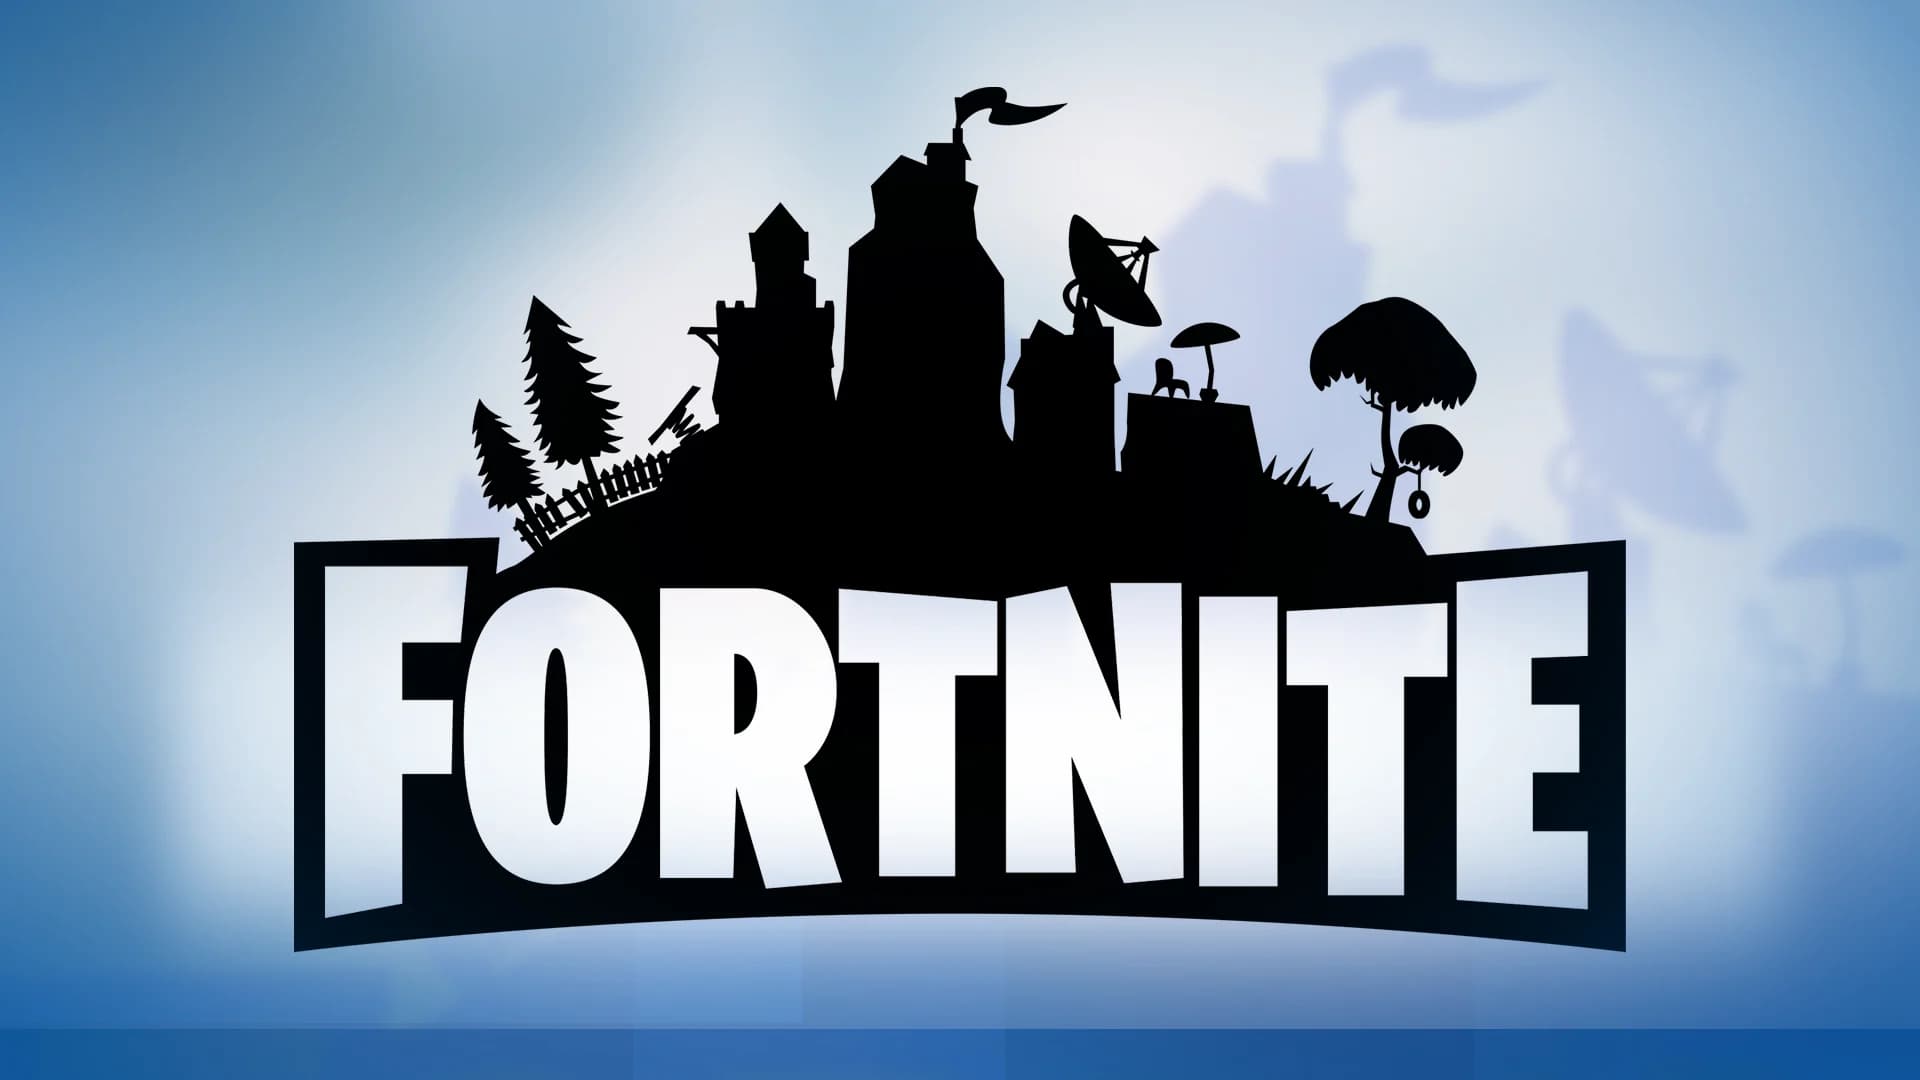 Fortnite maker to pay $520M for privacy, e-commerce abuses